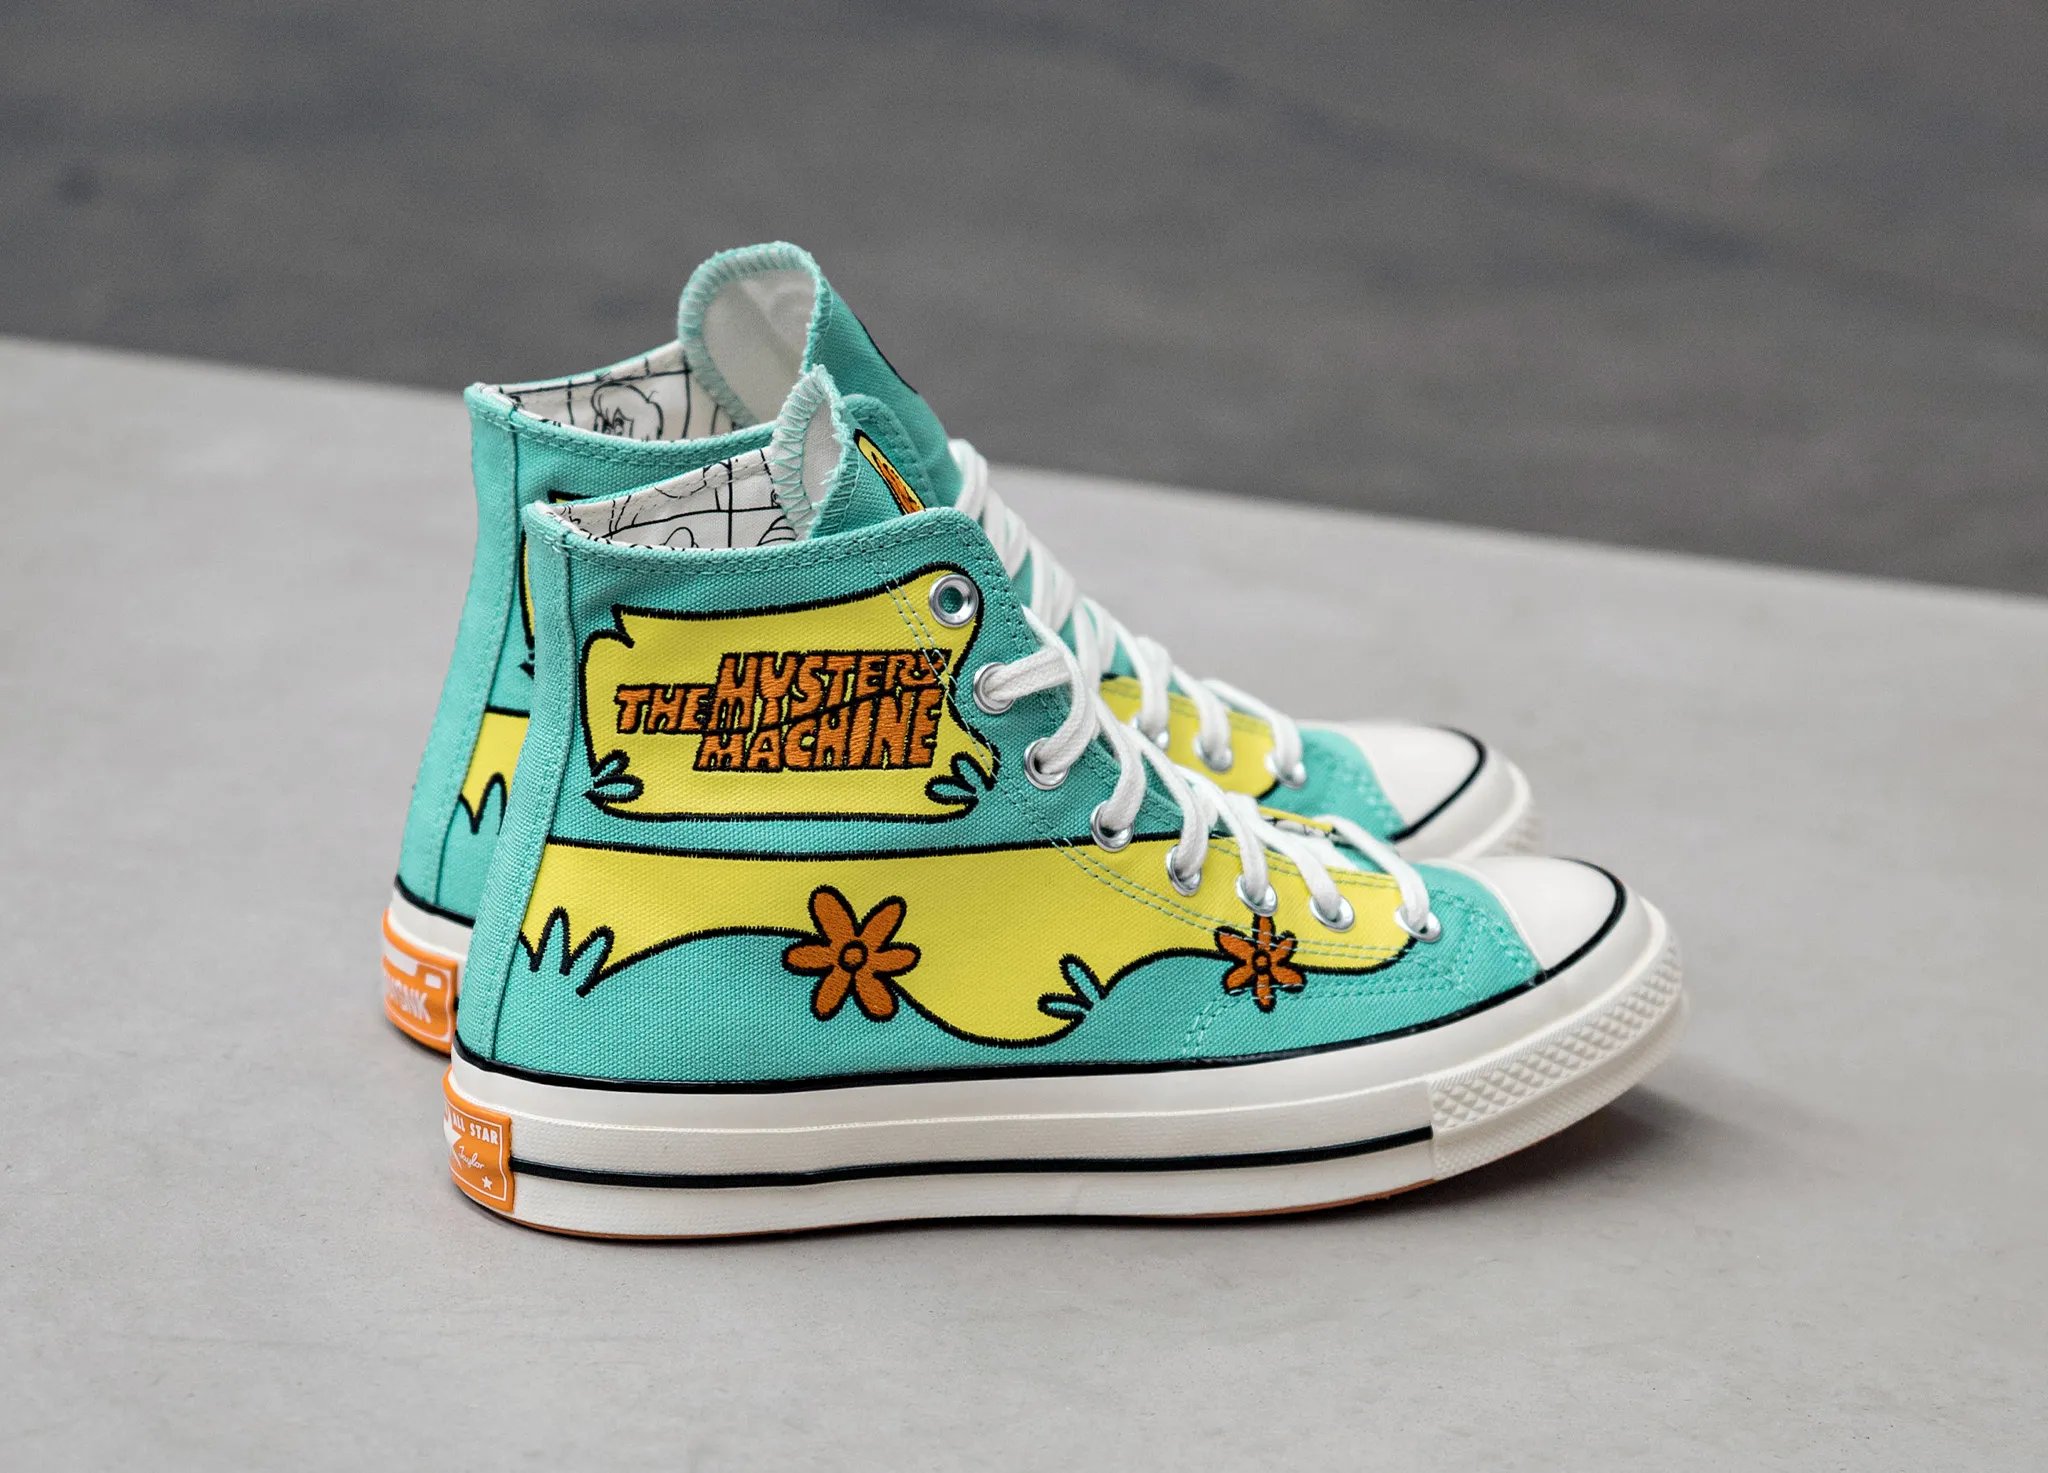 MoreSneakers.com on X: AD : Scooby-Doo x Converse Chuck 70 High